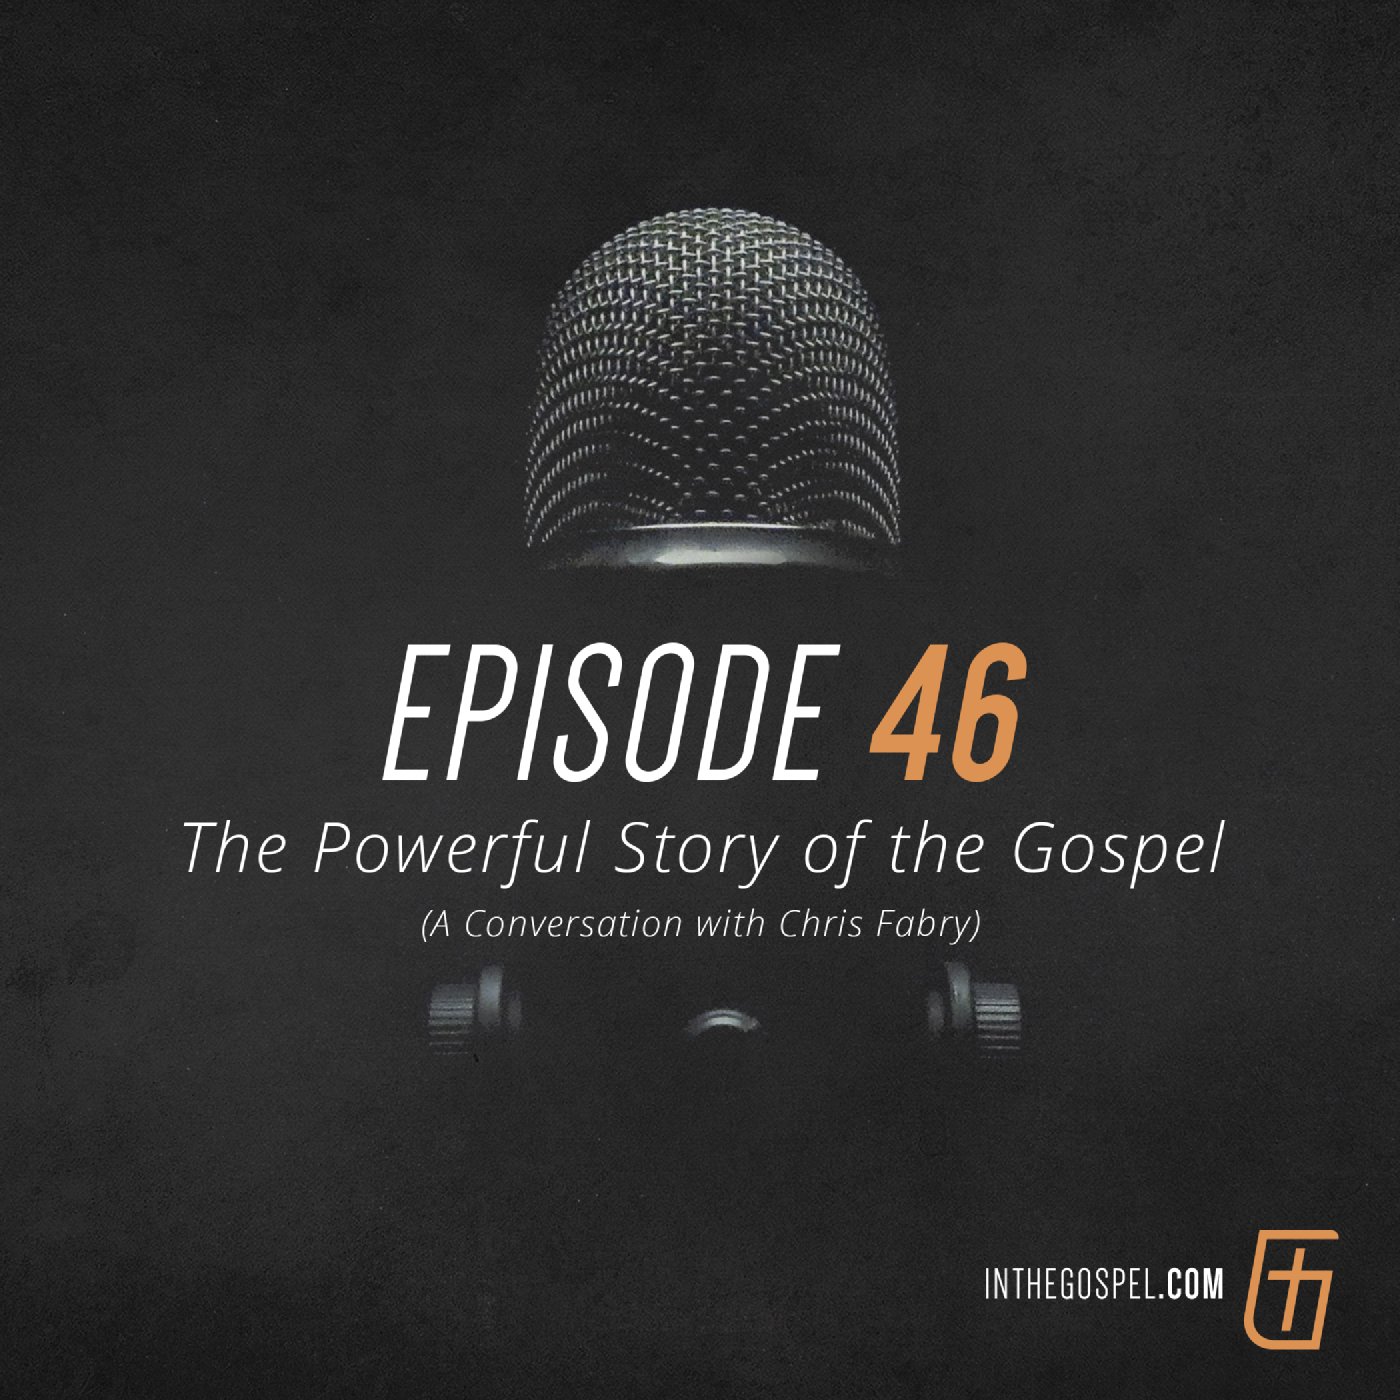 Episode 46: The Powerful Story of the Gospel—A Conversation with Chris Fabry